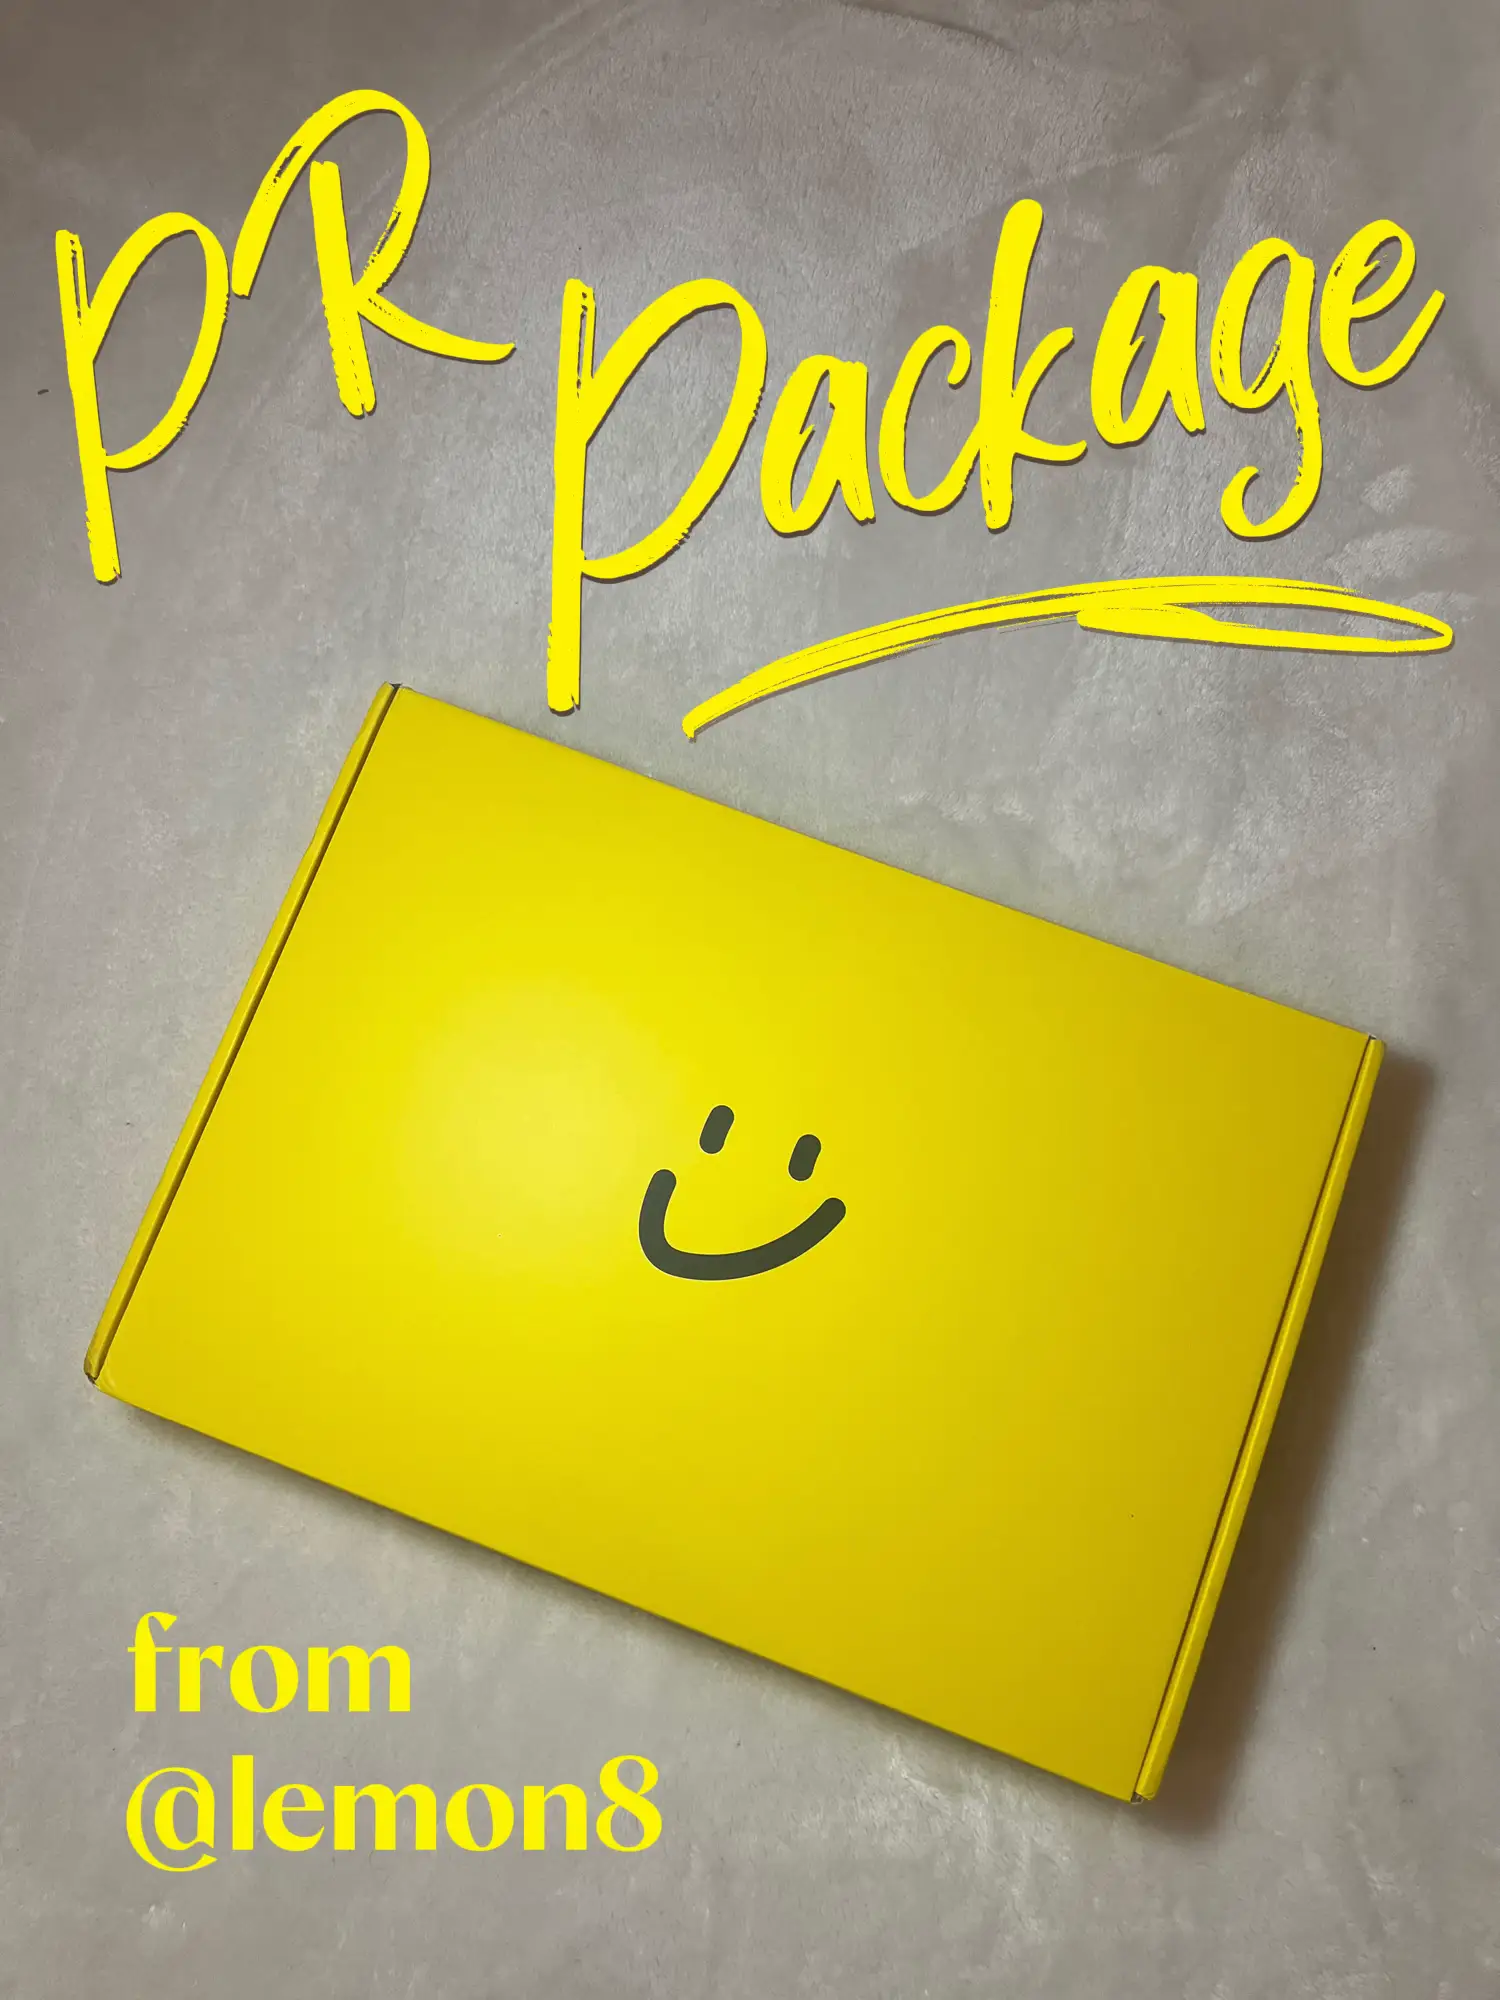  A yellow box with a smiley face on it.